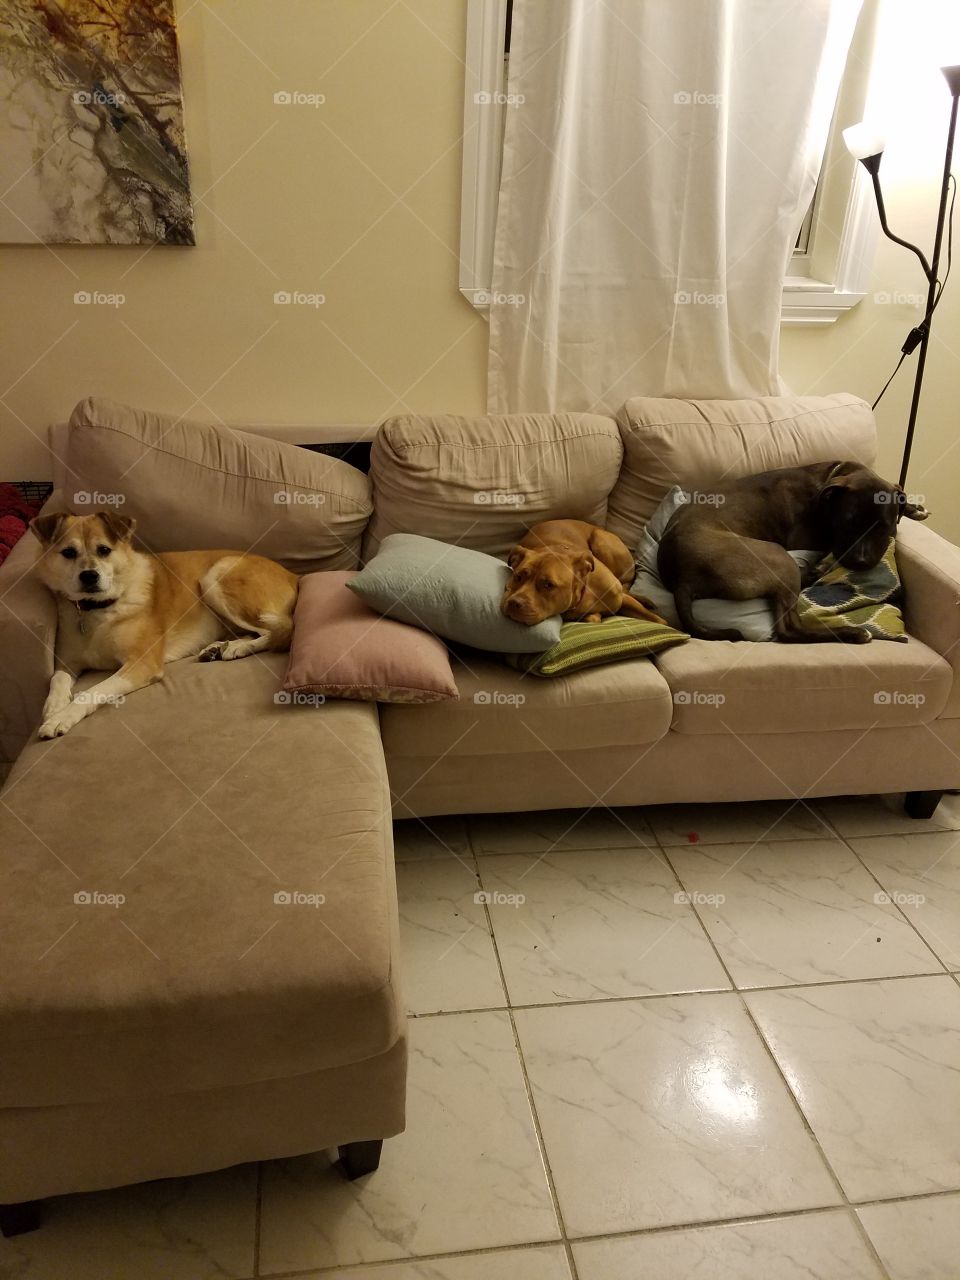 3 dogs and their perch.